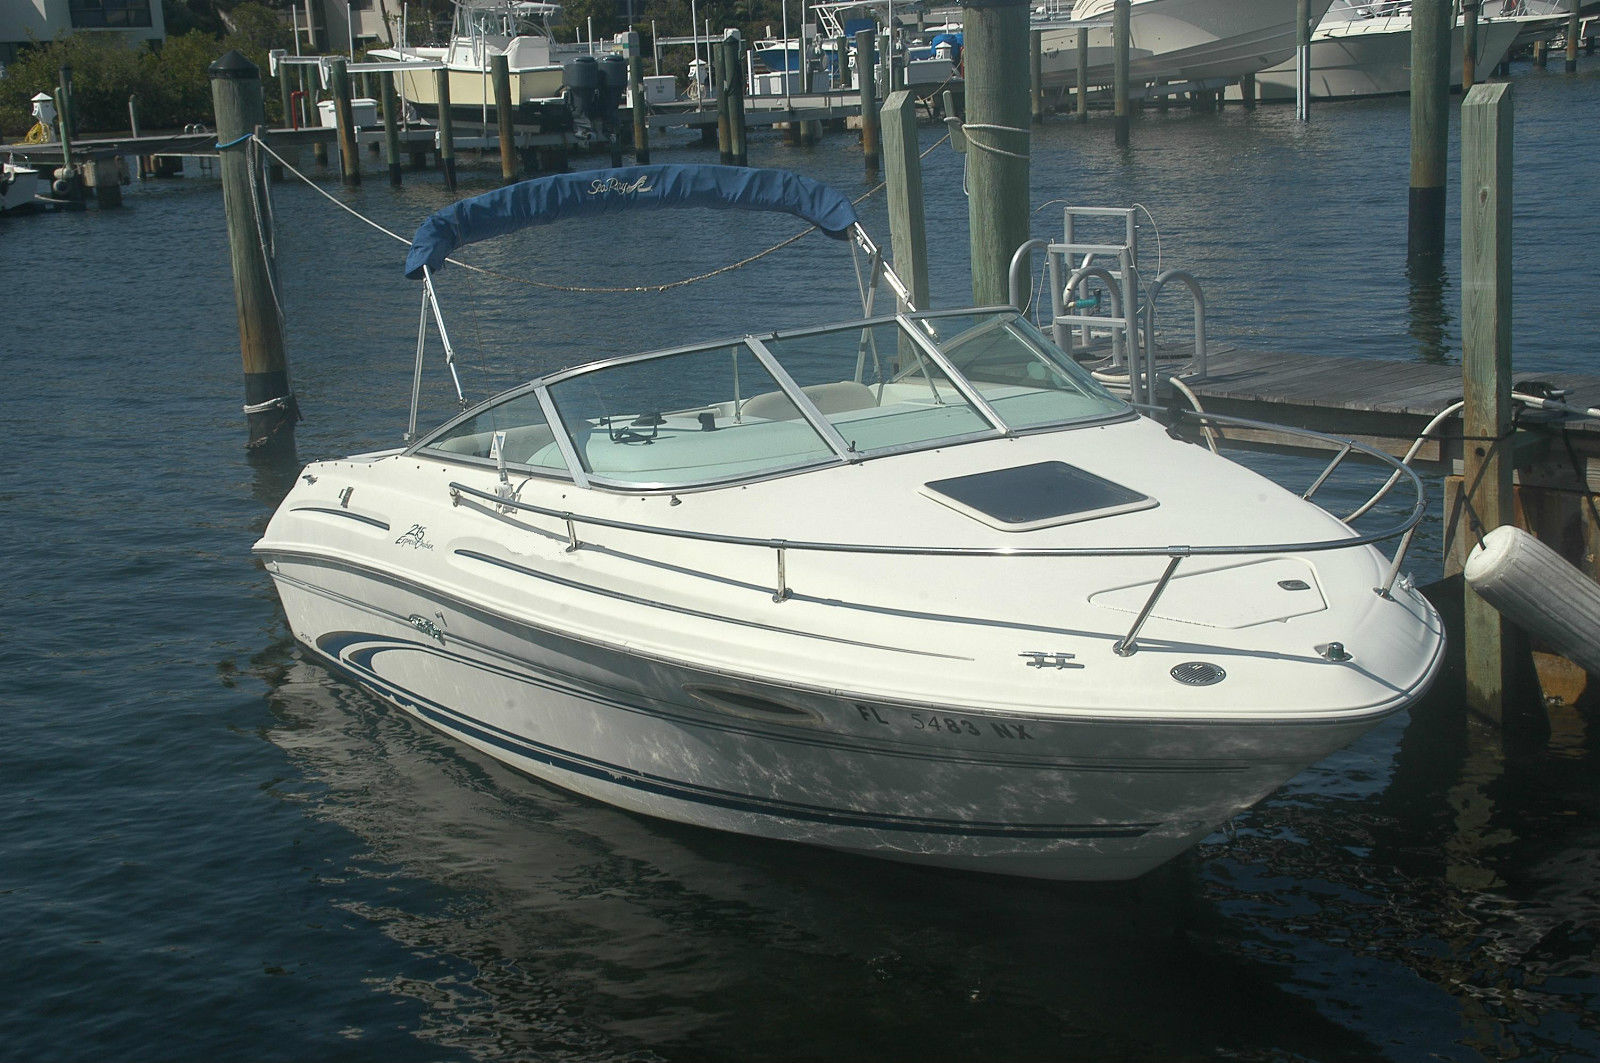 Sea Ray 215 Express Cruiser 2000 for sale for $6,950 